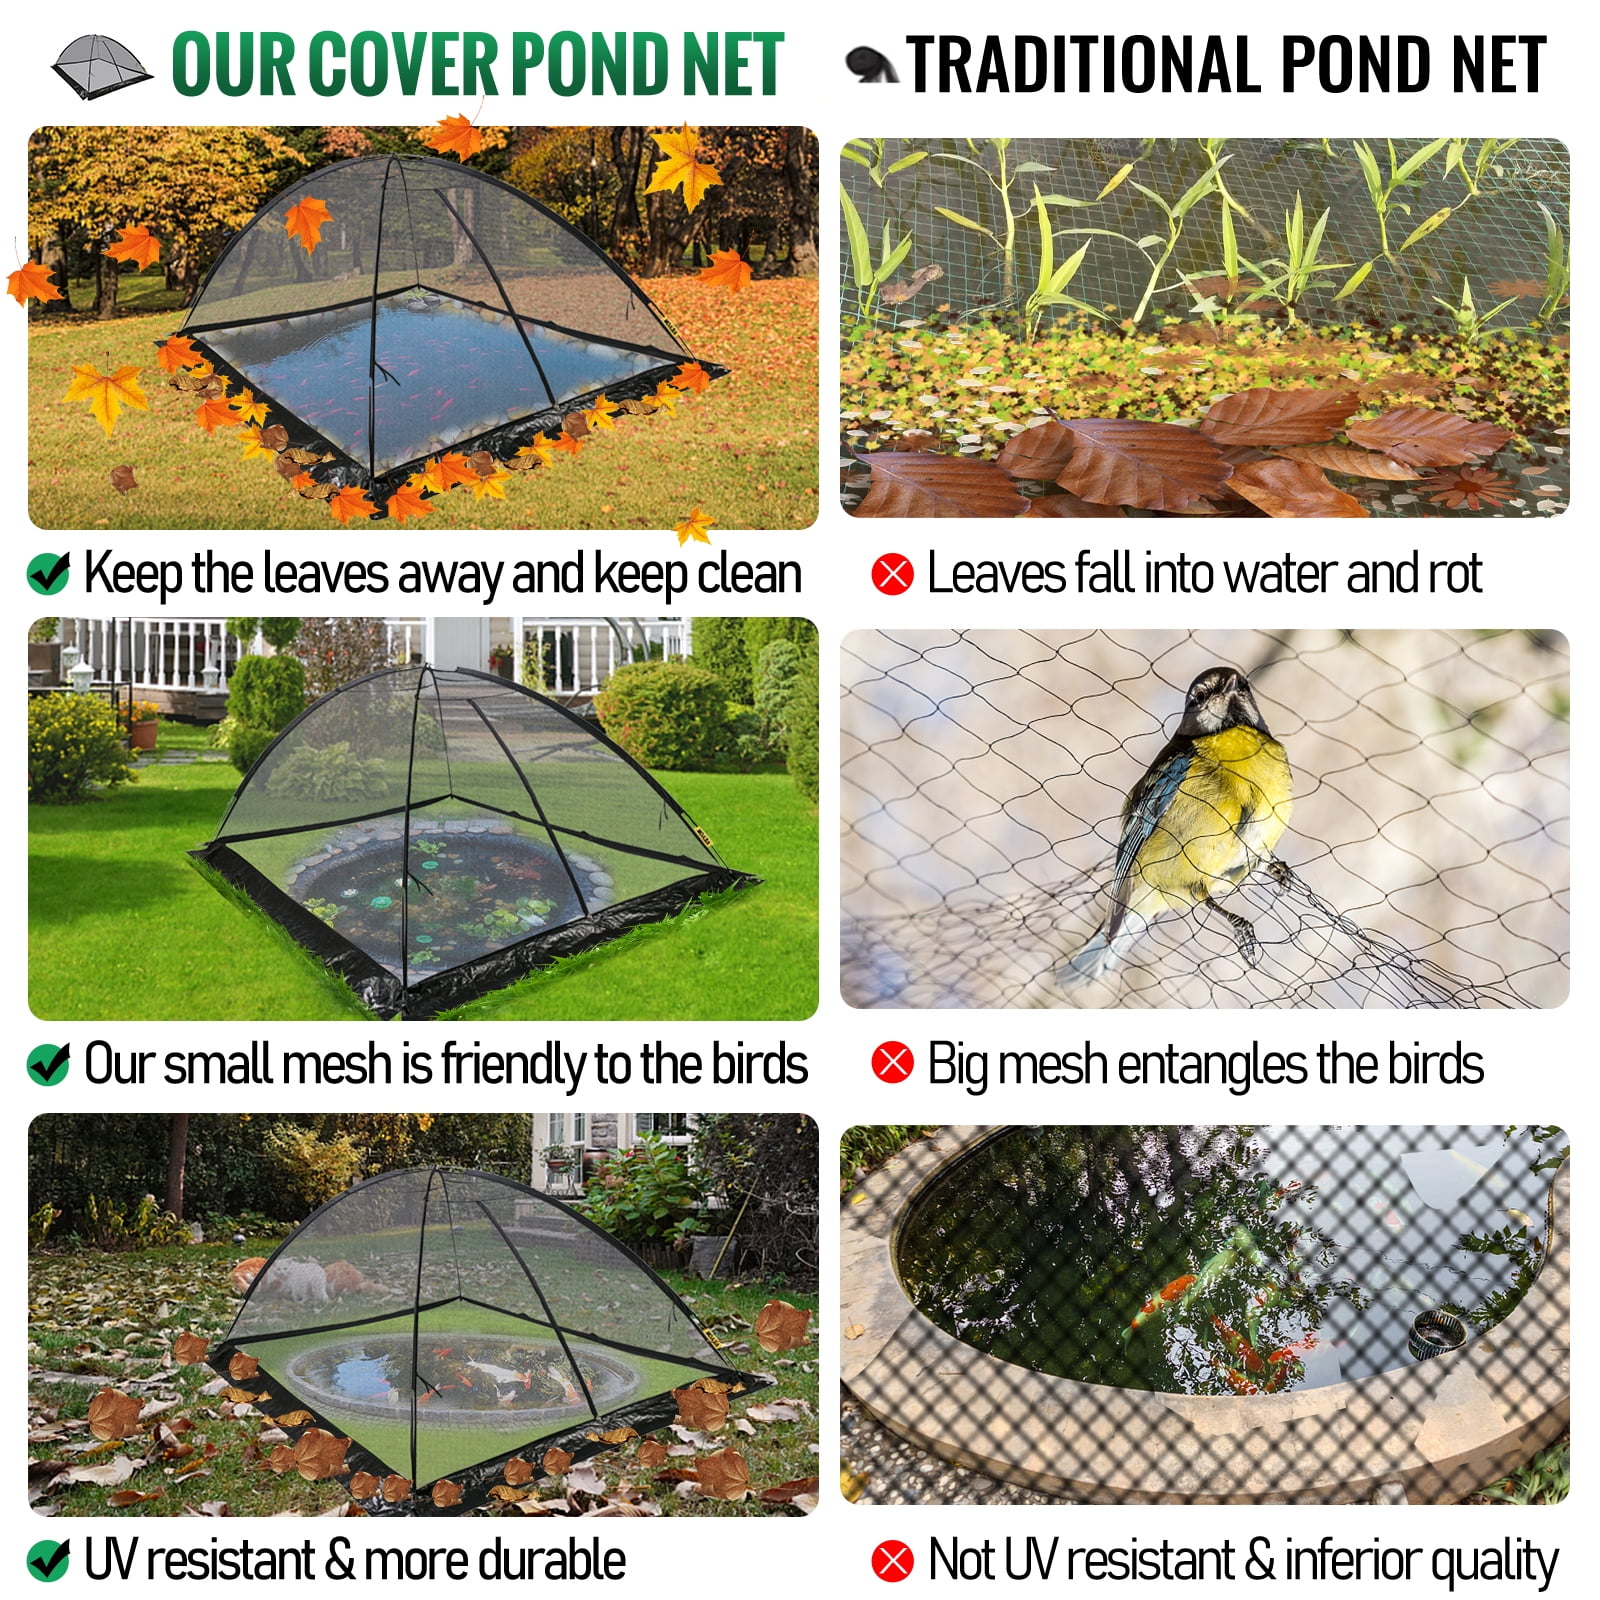 Nylon Mesh for Pond Pool and Garden to Protect Fishes Plants from Leaves and Predators 10x14 FT Pond Netting Dome Net Toyswill Premium Outdoor Pond Garden Cover Pond Dome with Tent Ropes and Zipper 